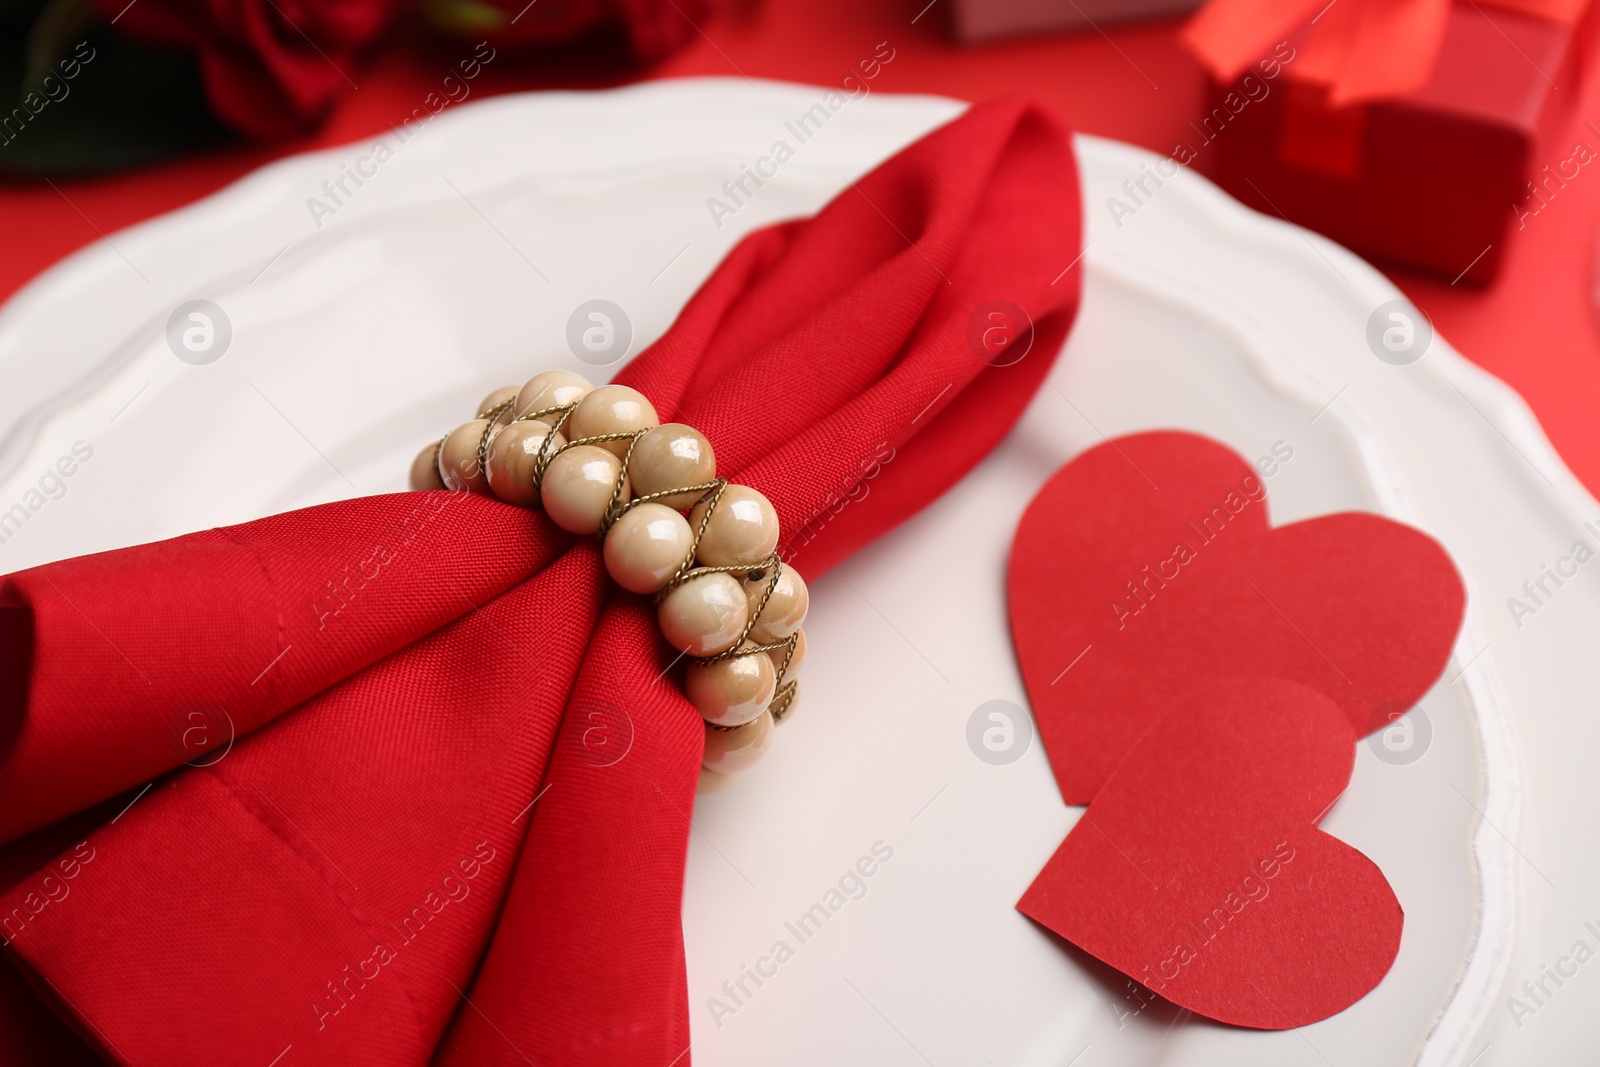 Photo of Plates with napkin, paper hearts and gift box bouquet of roses on red table, closeup. Romantic dinner place setting